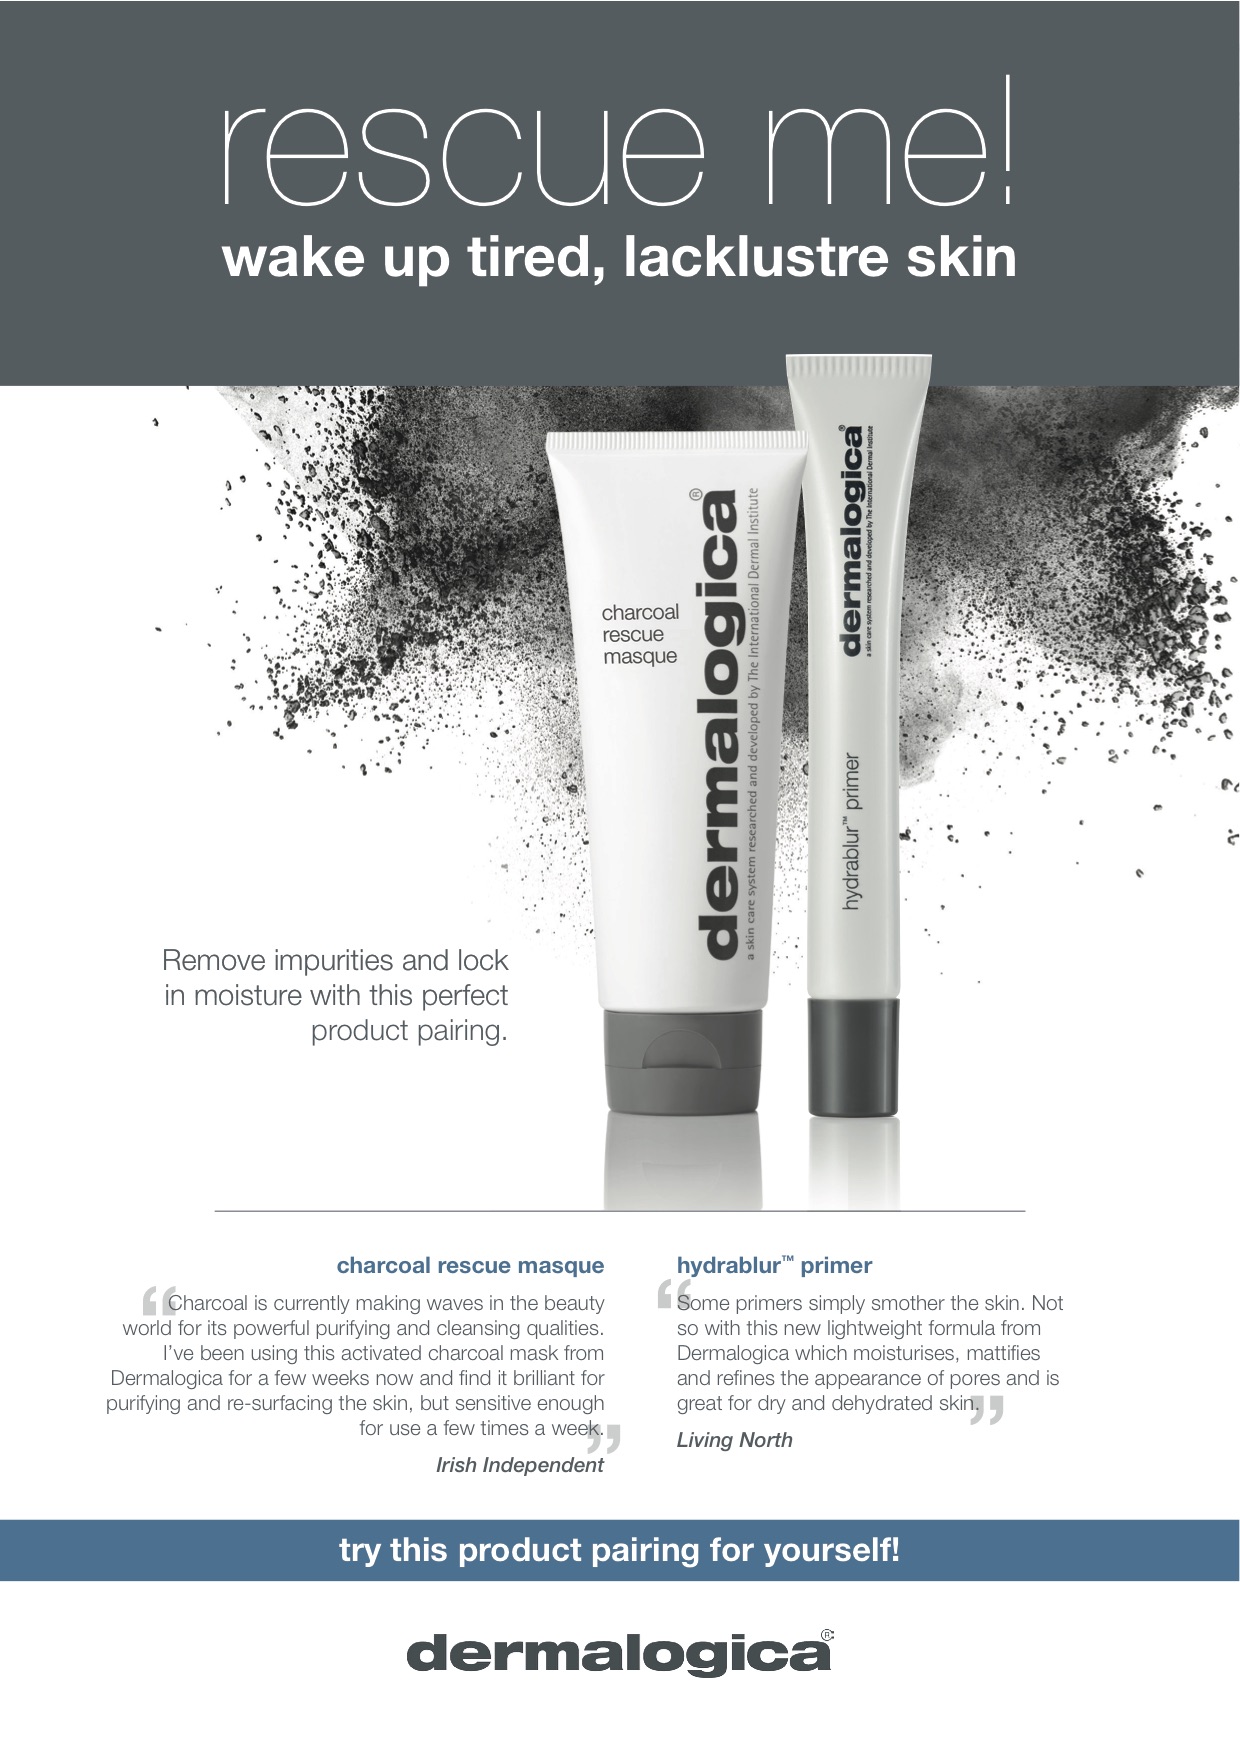 Rescue skin with skin detox set from dermalogica